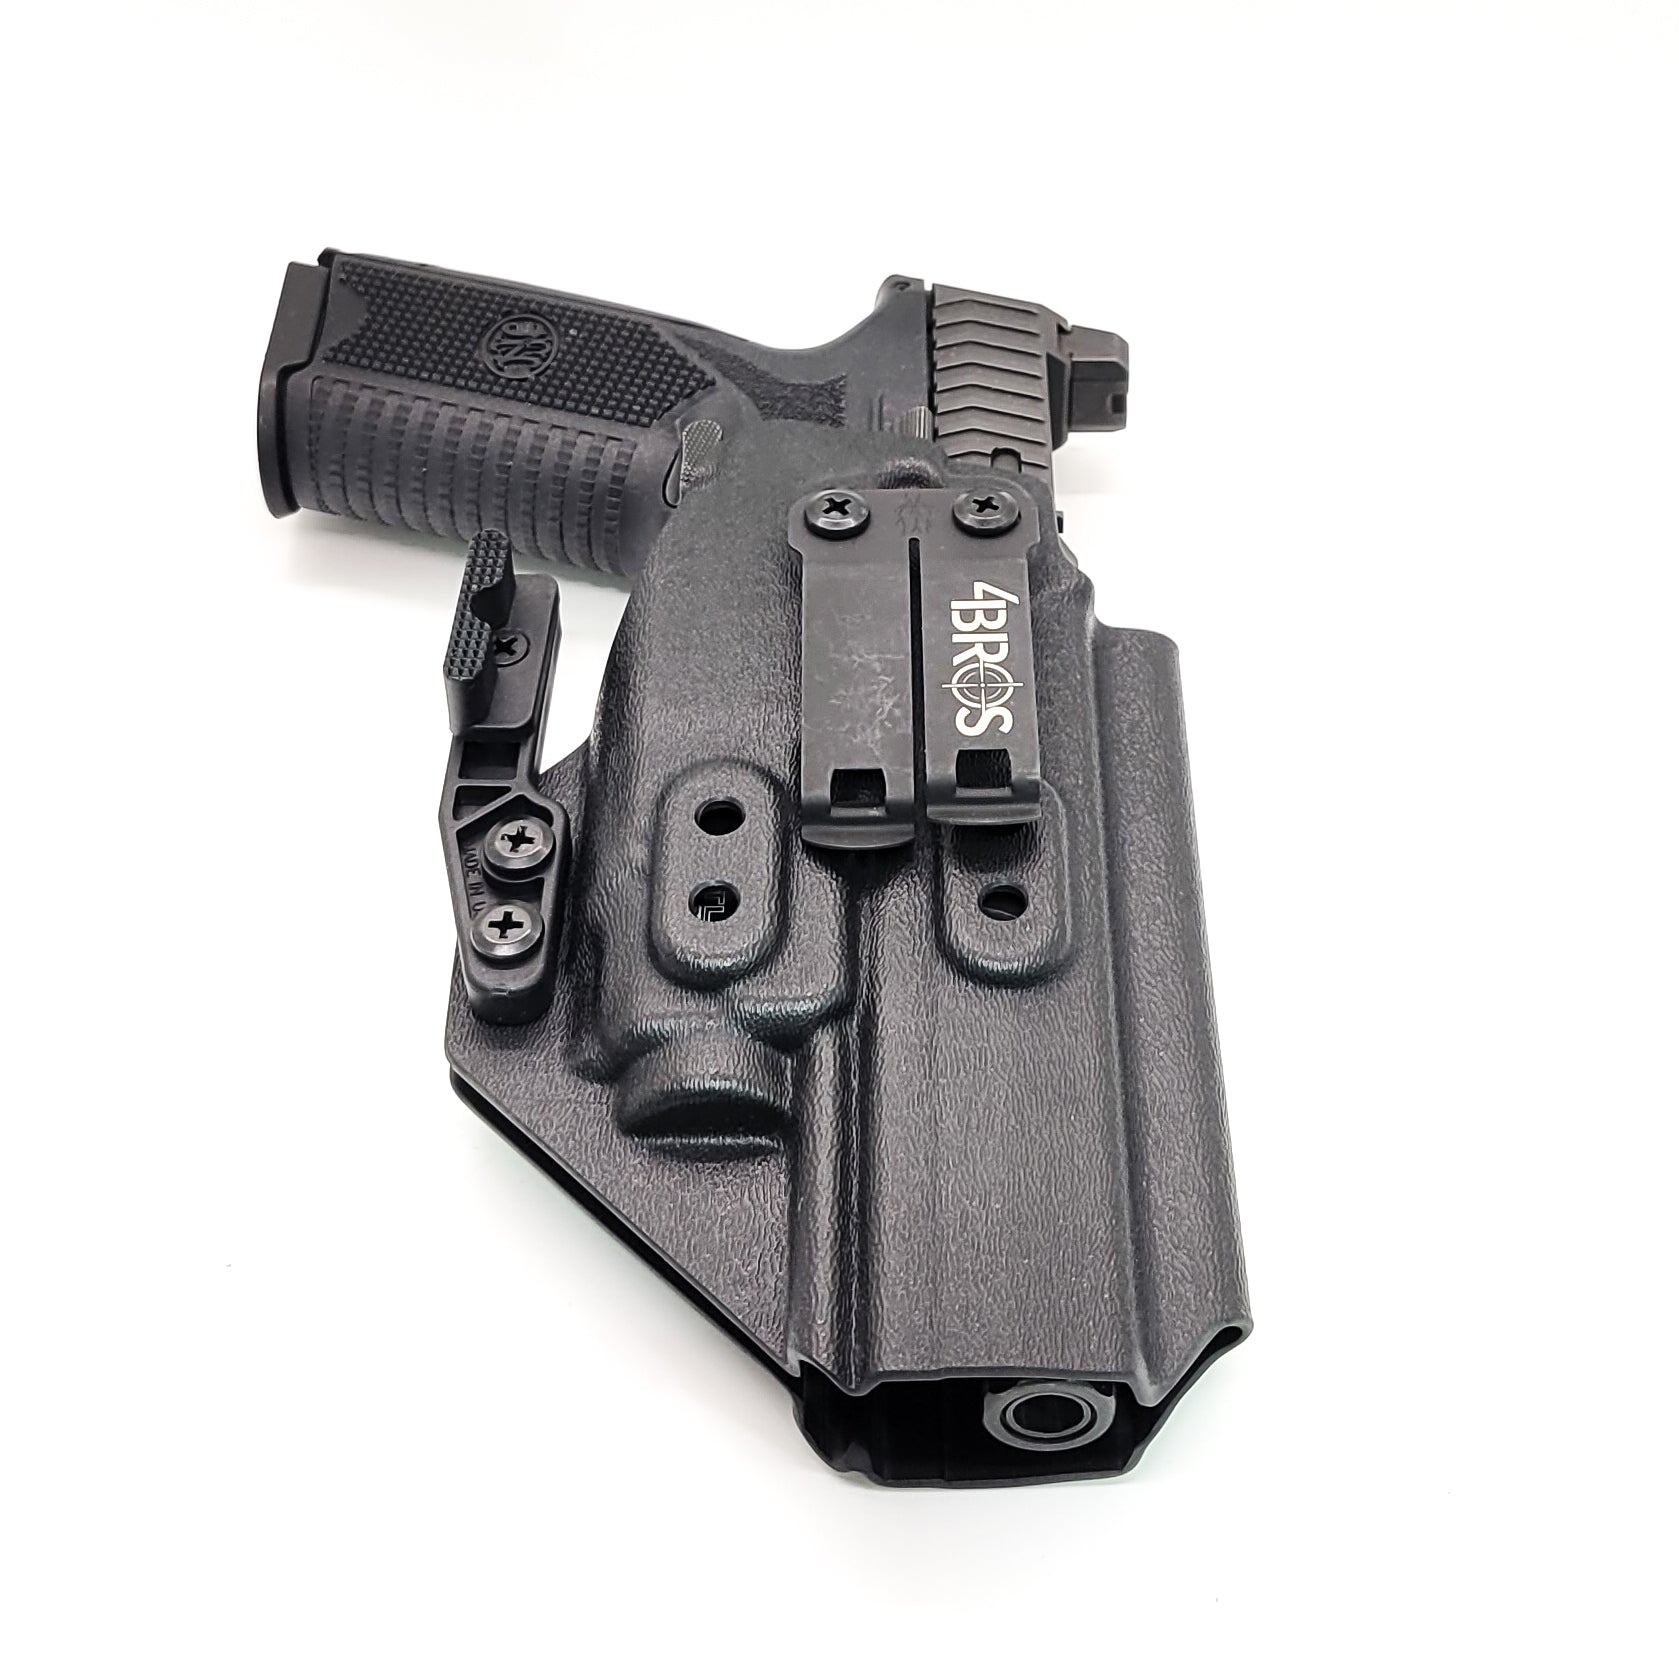 For the best Inside Waistband IWB AIWB Kydex Holster for the FN 509 LS Edge, and Apex Tactical 5.00" slide with the Streamlight TLR-8 or TLR-8A, shop Four Brothers Holsters. Open Muzzle, adjustable retention, cleared for suppressor height sights up to 3/8", full sweat guard, cut for red dot sights. Made in the USA.